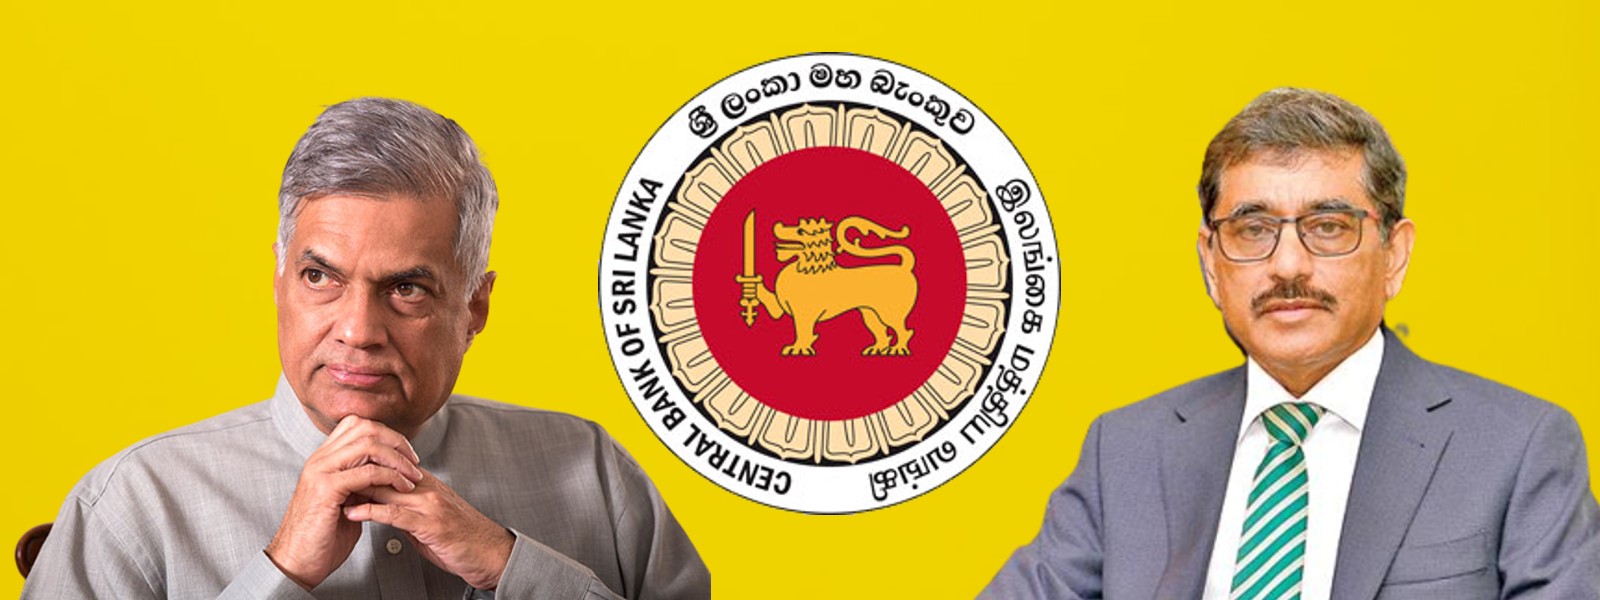 NO dispute between Governor & Prime Minister – CBSL